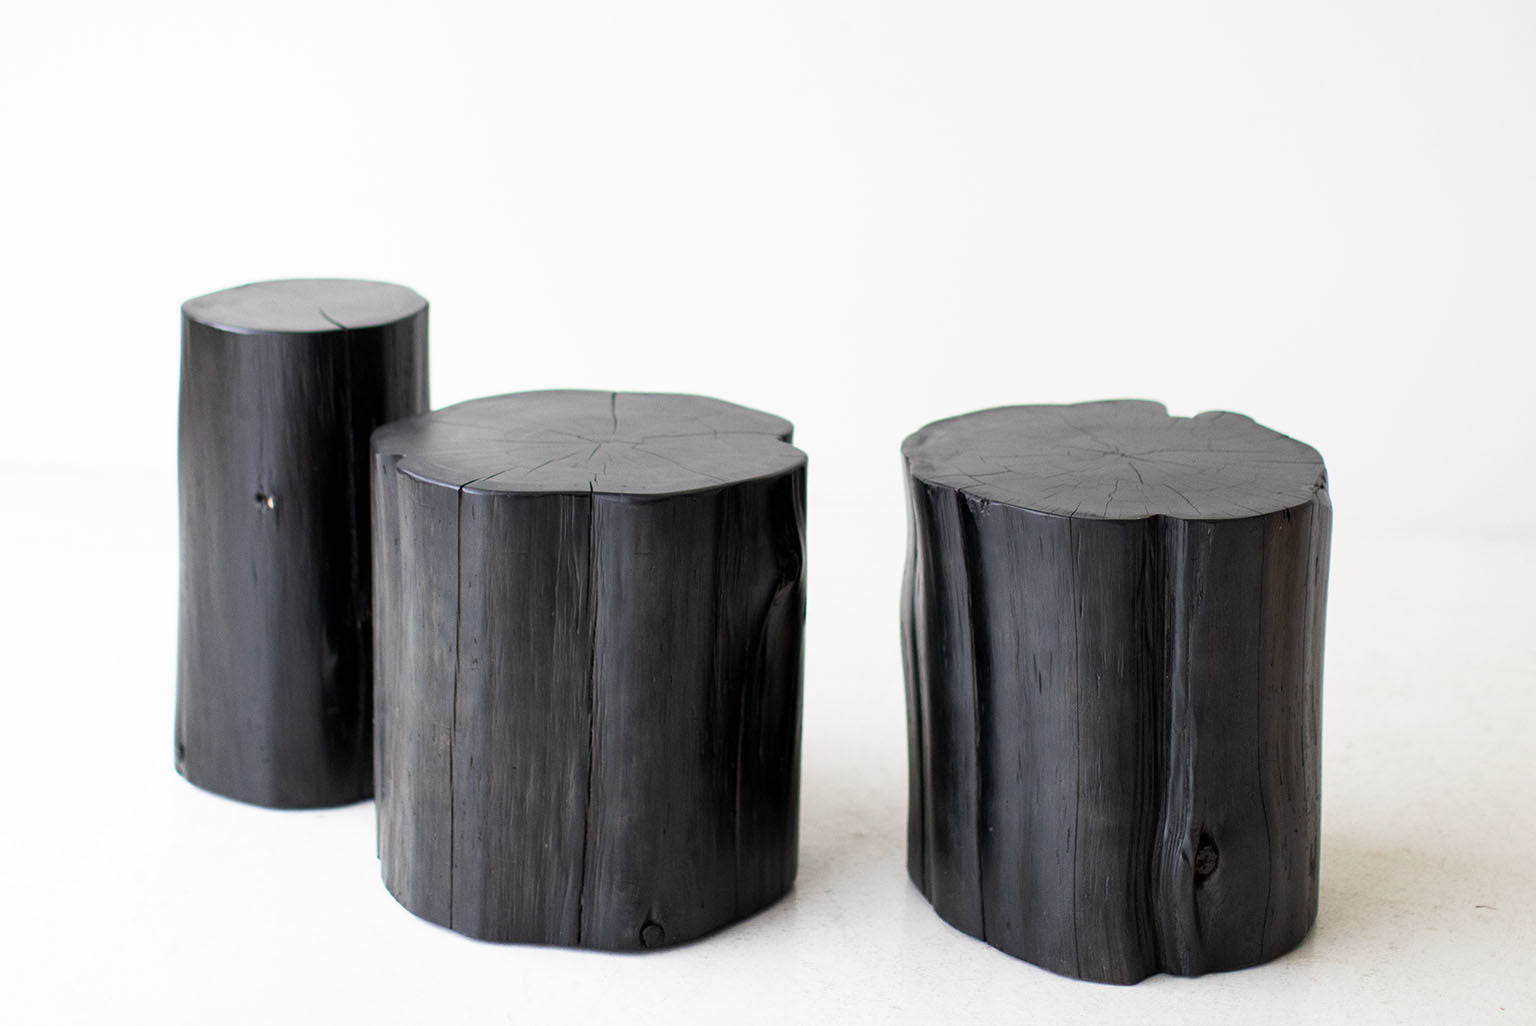 Large Outdoor Tree Stump Side Tables in Black - 3922